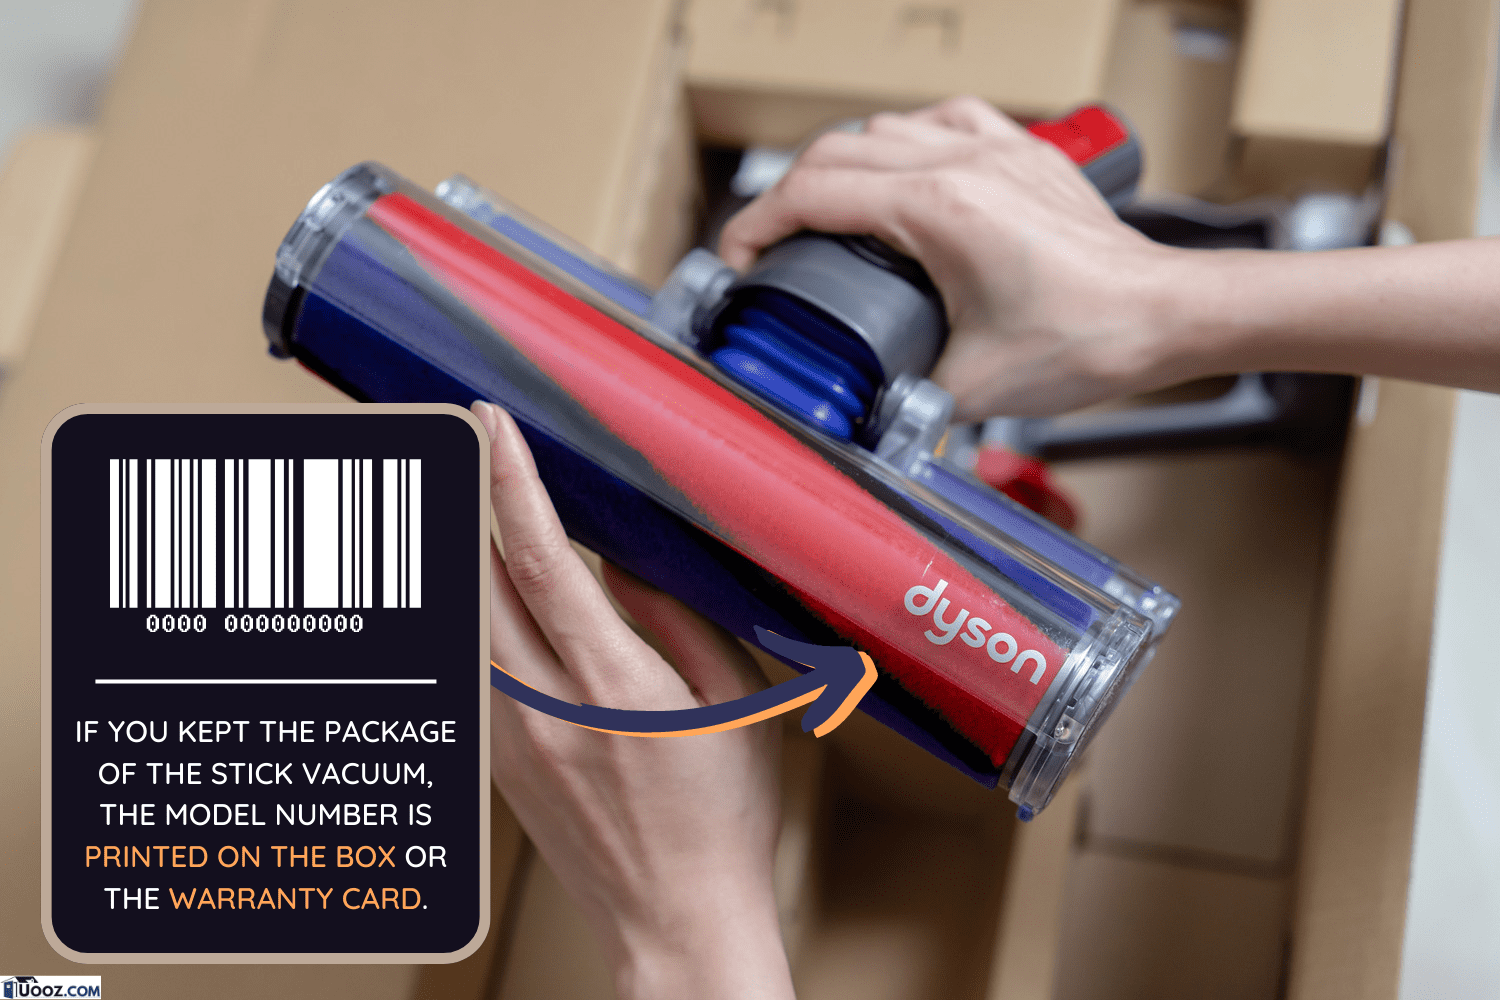 Lady’s hand holding the Soft roller cleaner head of the brand new Dyson Cyclone V10 Fluffy vacuum cleaner during open box - Which Dyson Stick Vacuum Do I Have